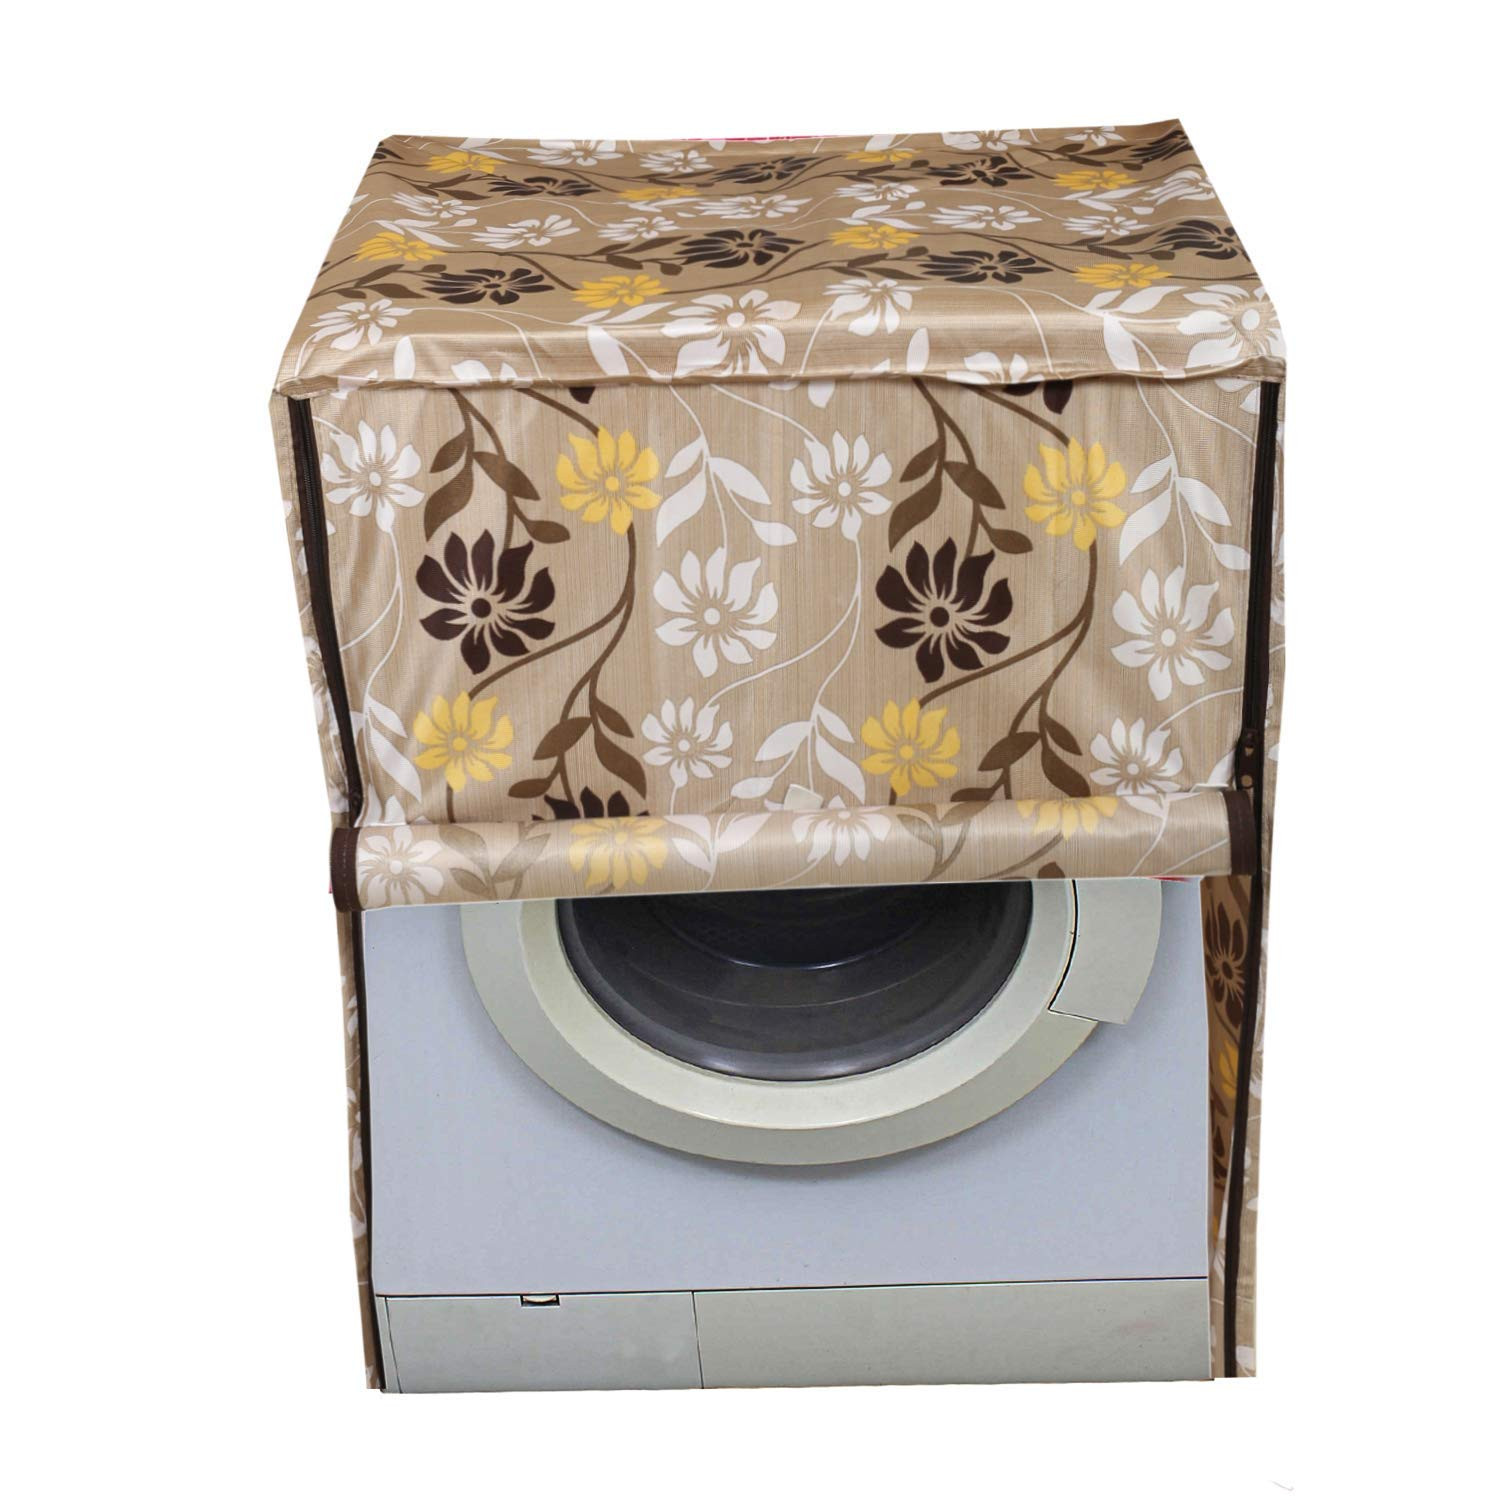 Kuber Industries Knitting Zig Zag Design Cotton Front Load Fully Automatic Washing Machine Cover - Brown, Standard (CTKTC05194)